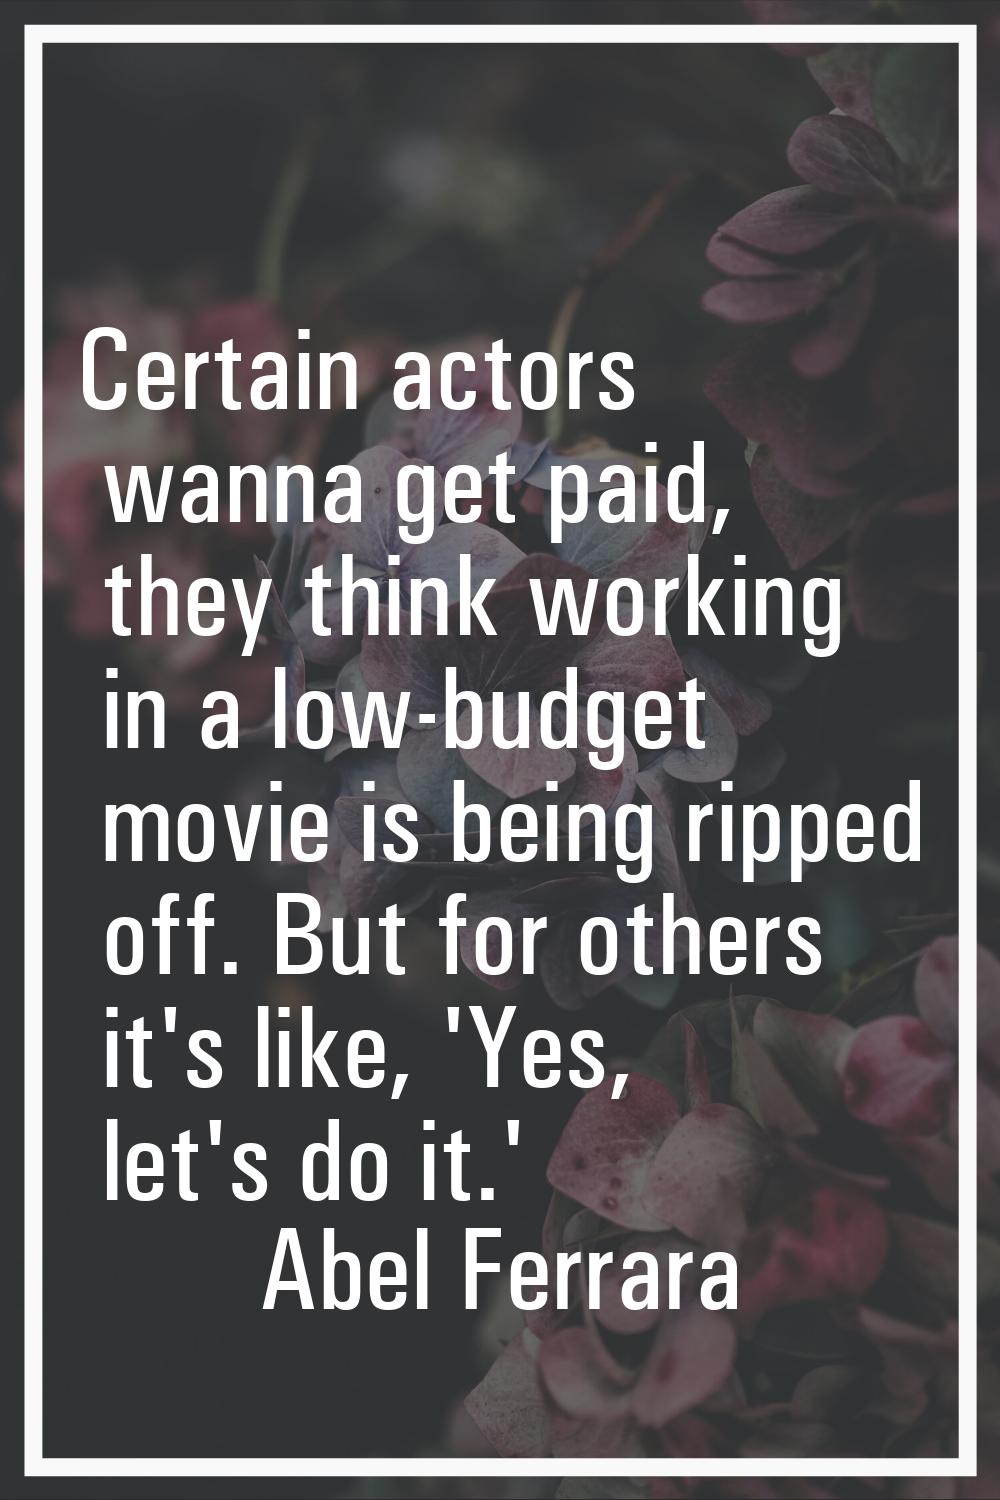 Certain actors wanna get paid, they think working in a low-budget movie is being ripped off. But fo